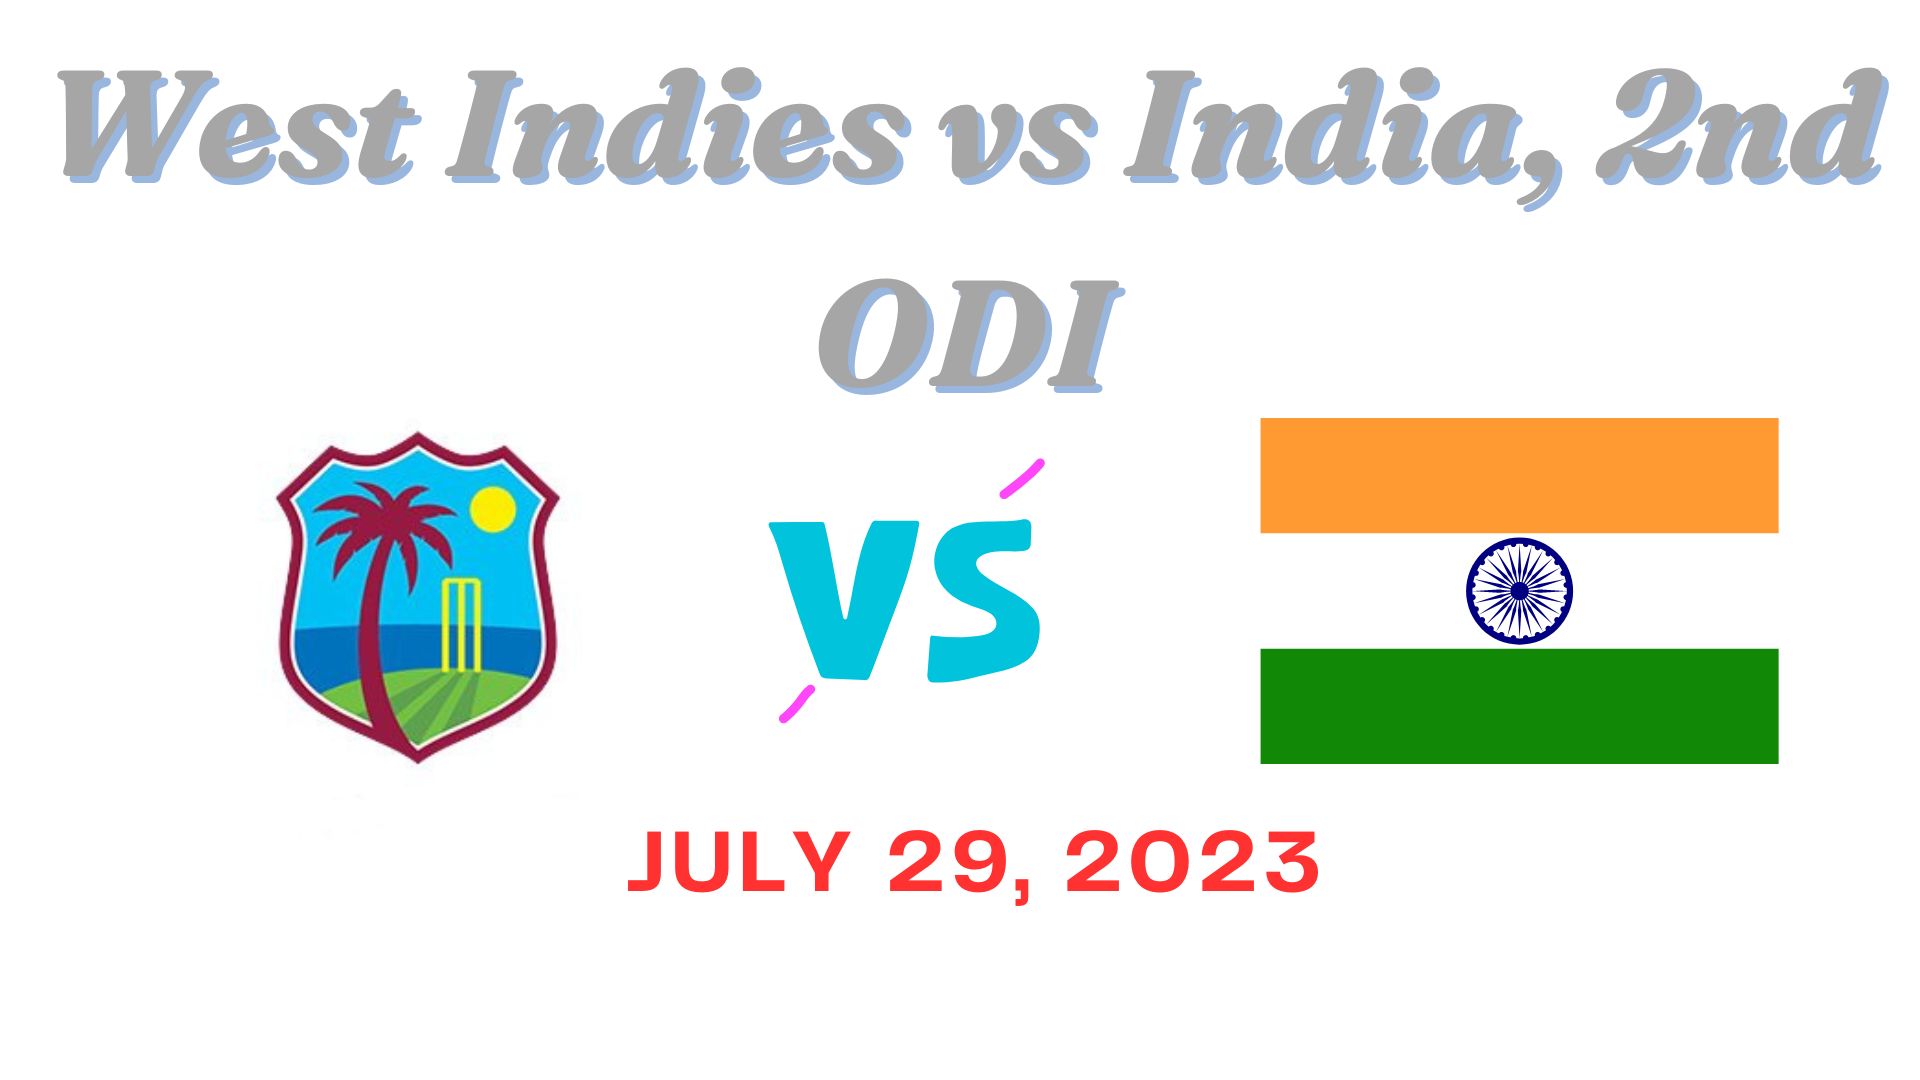 West Indies vs India, 2nd ODI Dream11 Prediction, Fantasy Cricket, Playing XI